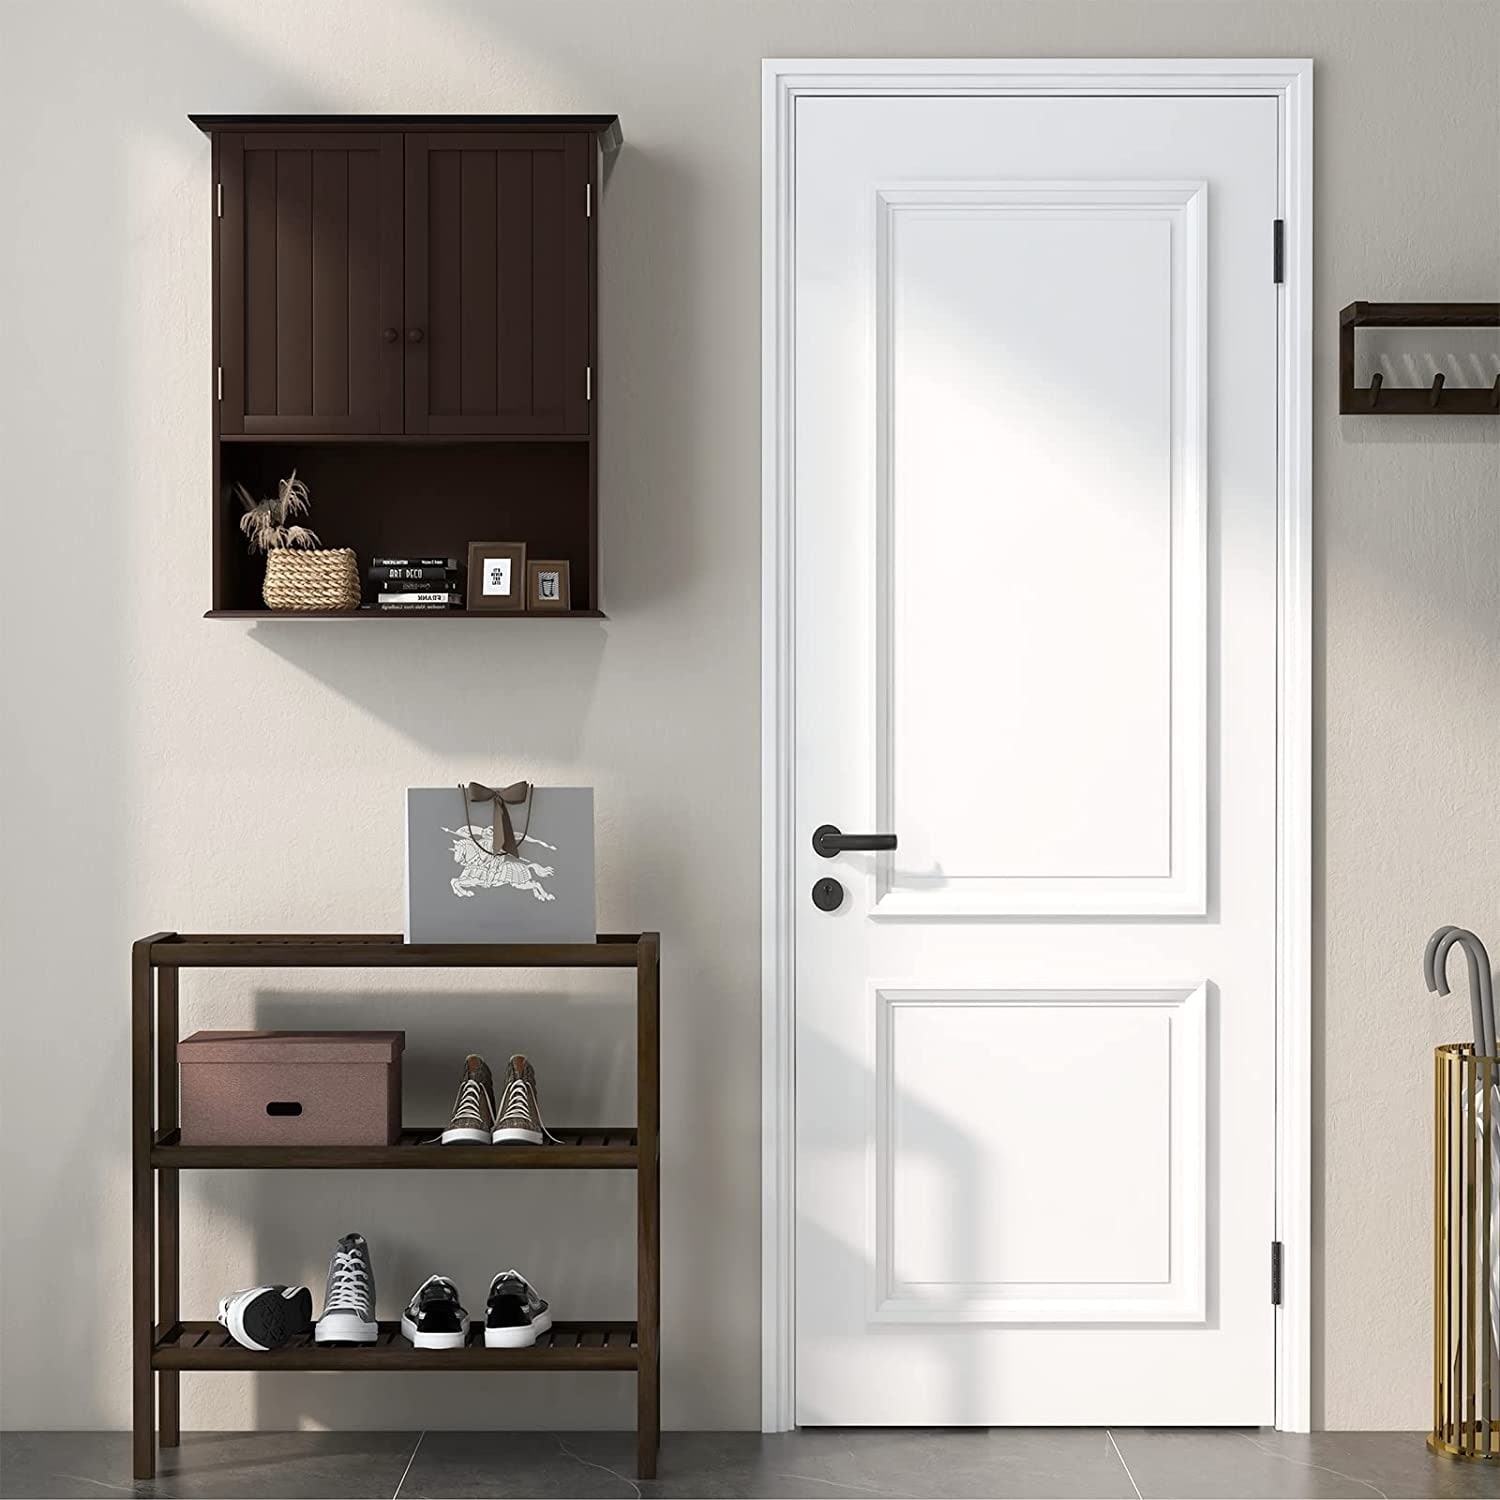 https://ak1.ostkcdn.com/images/products/is/images/direct/54b27096a46b224c12f196e7b8b5f1c6b256bae5/Wall-Mount-Bathroom-Cabinet-Wooden-Medicine-Cabinet-Storage-Organizer-with-2-Doors-and-1-Shelf-Cottage-Collection-Wall-Cabinet.jpg